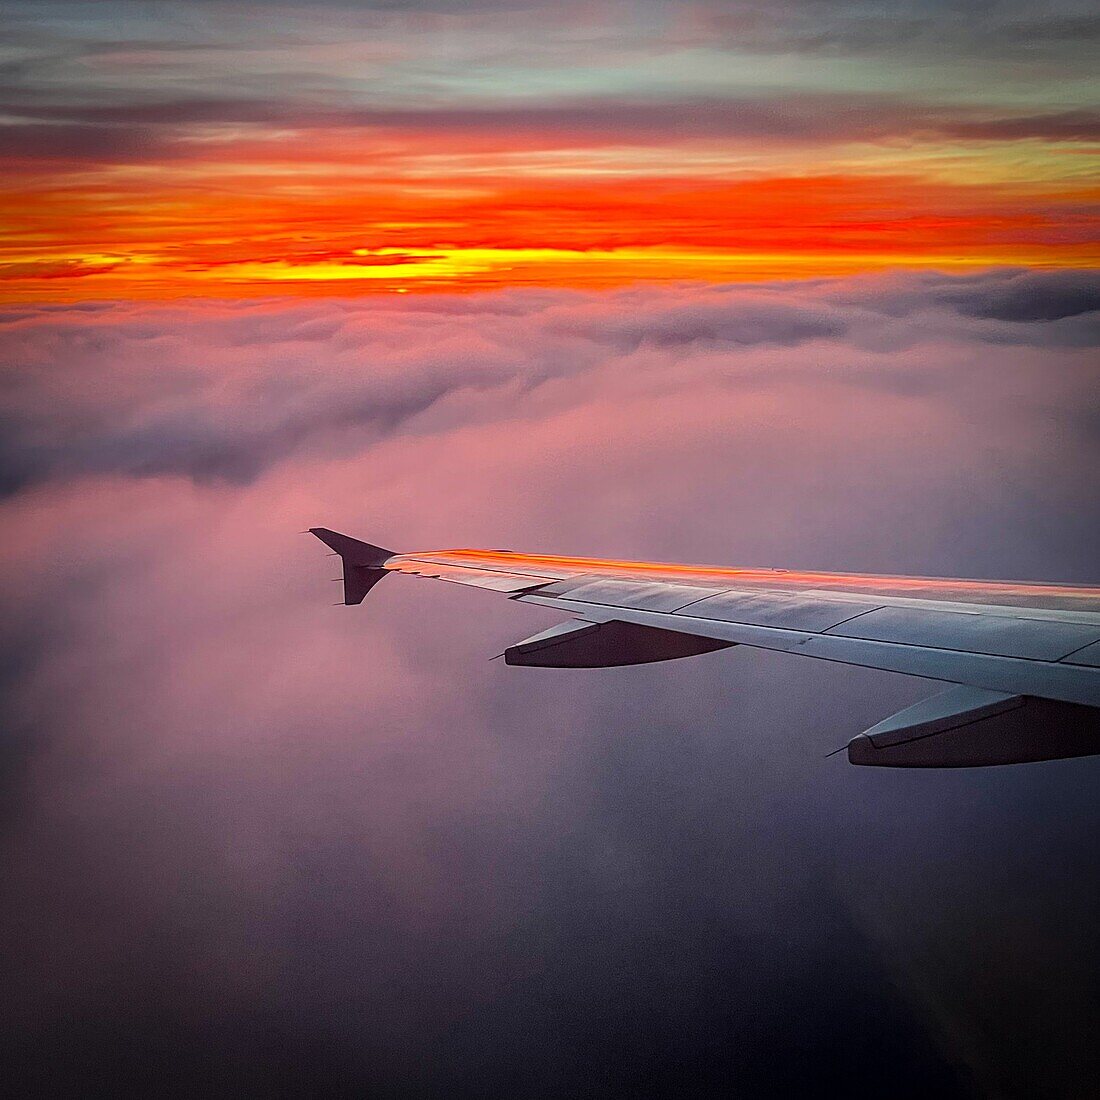 Wing of a plane at sunset over the clouds